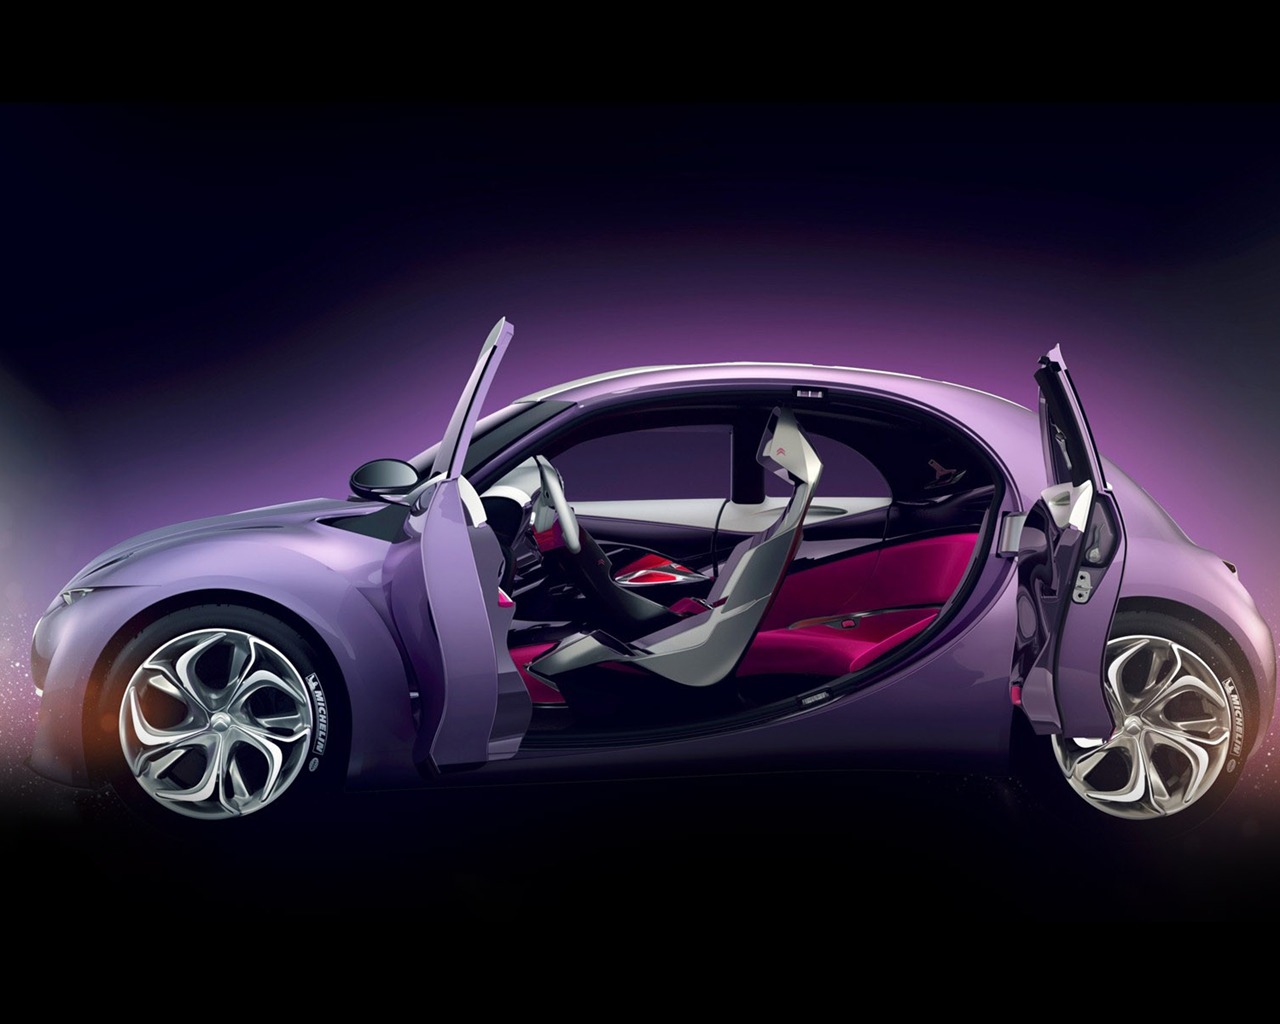 Special edition of concept cars wallpaper (13) #14 - 1280x1024